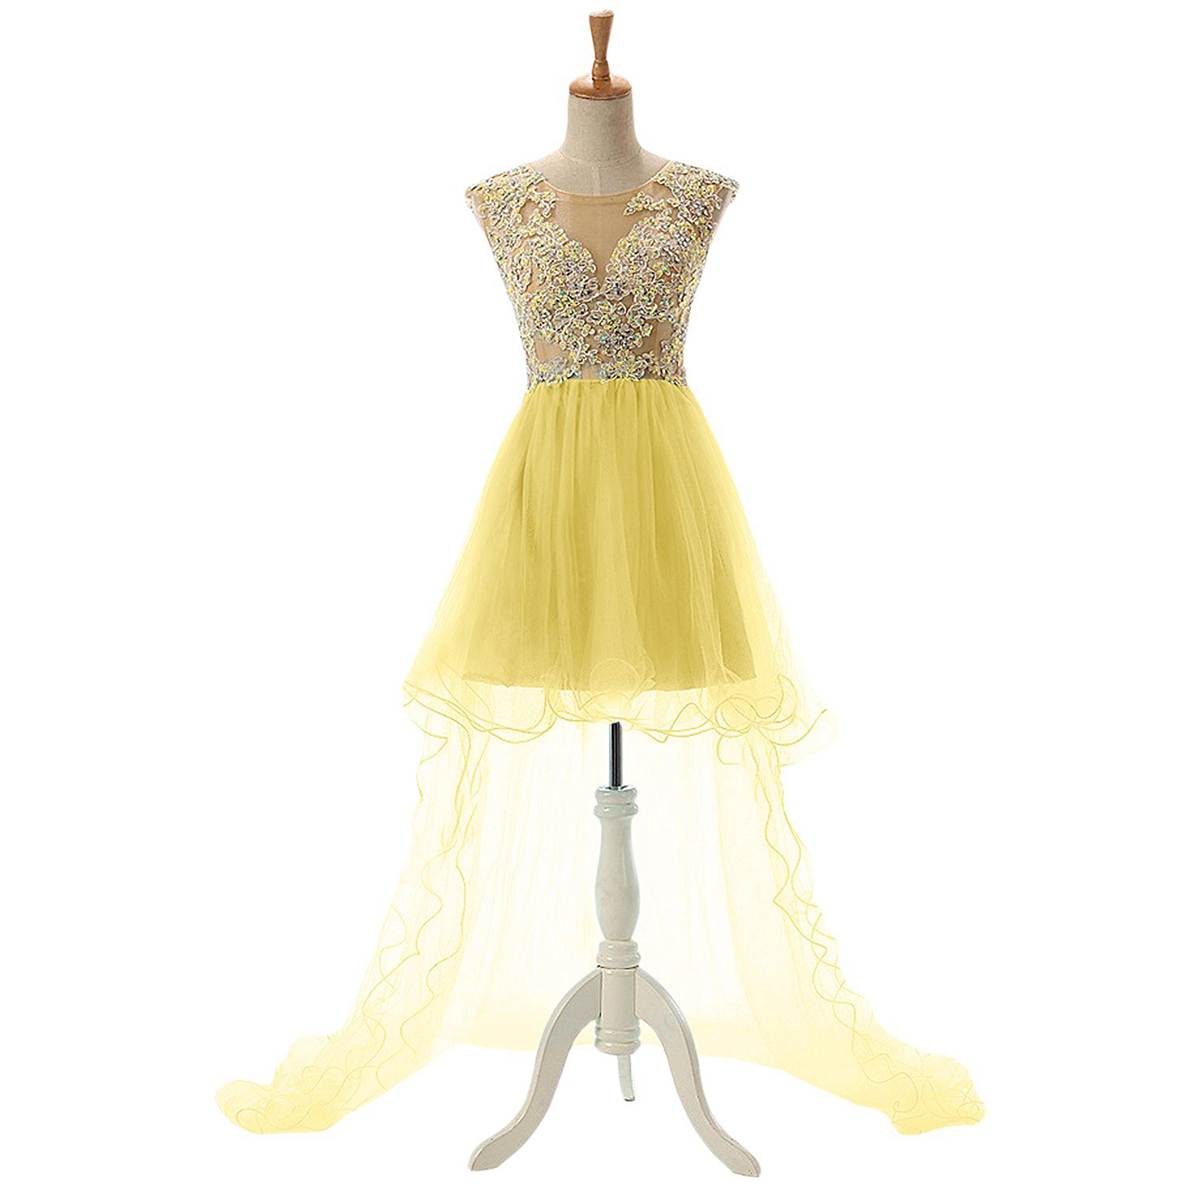 Scoop Neck See-through Lace Appliques Tulle Prom Dress, Crystal Open Back High Low Prom Dress, Cap Sleeves Yellow Prom Dress, #020102686